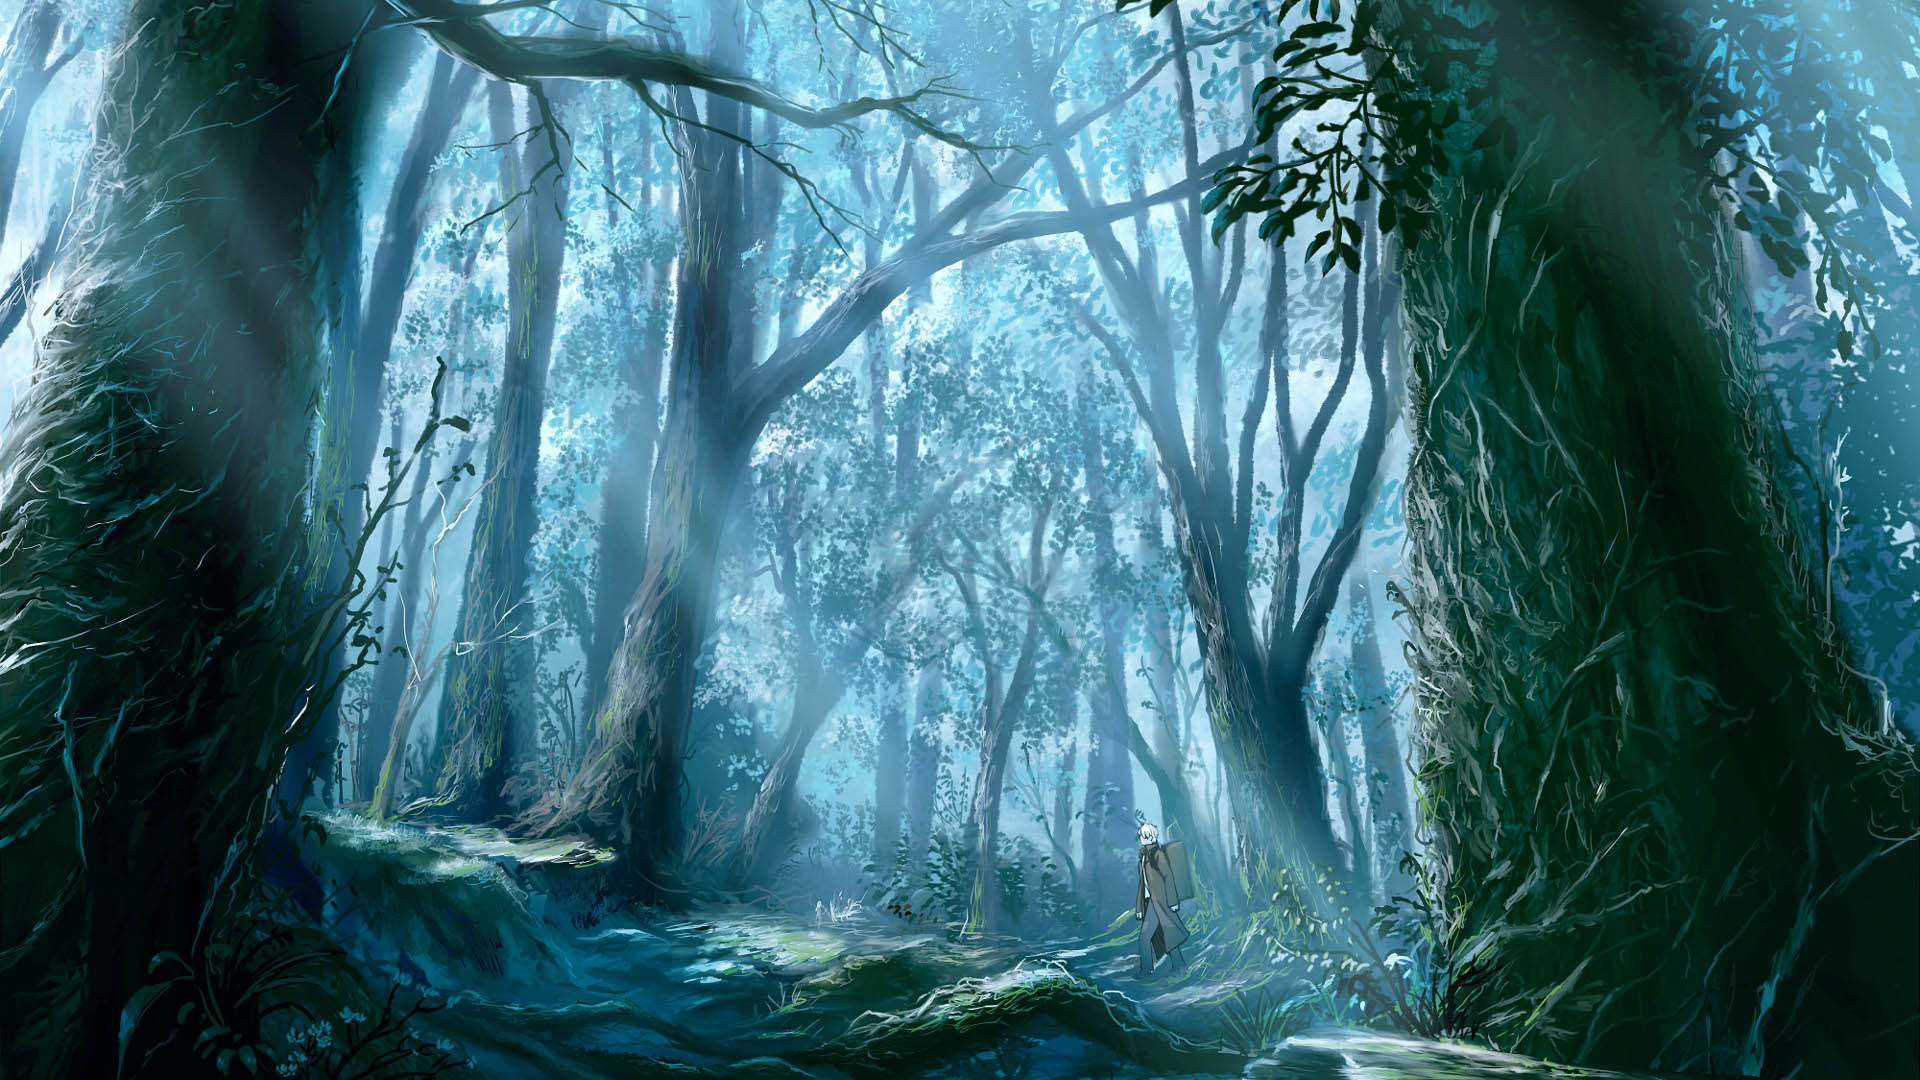 Download 2560x1440 Wallpaper Anime Original Road Forest Dual Wide  Widescreen 169 Widescreen 2560x1440 Hd Image Background 23866